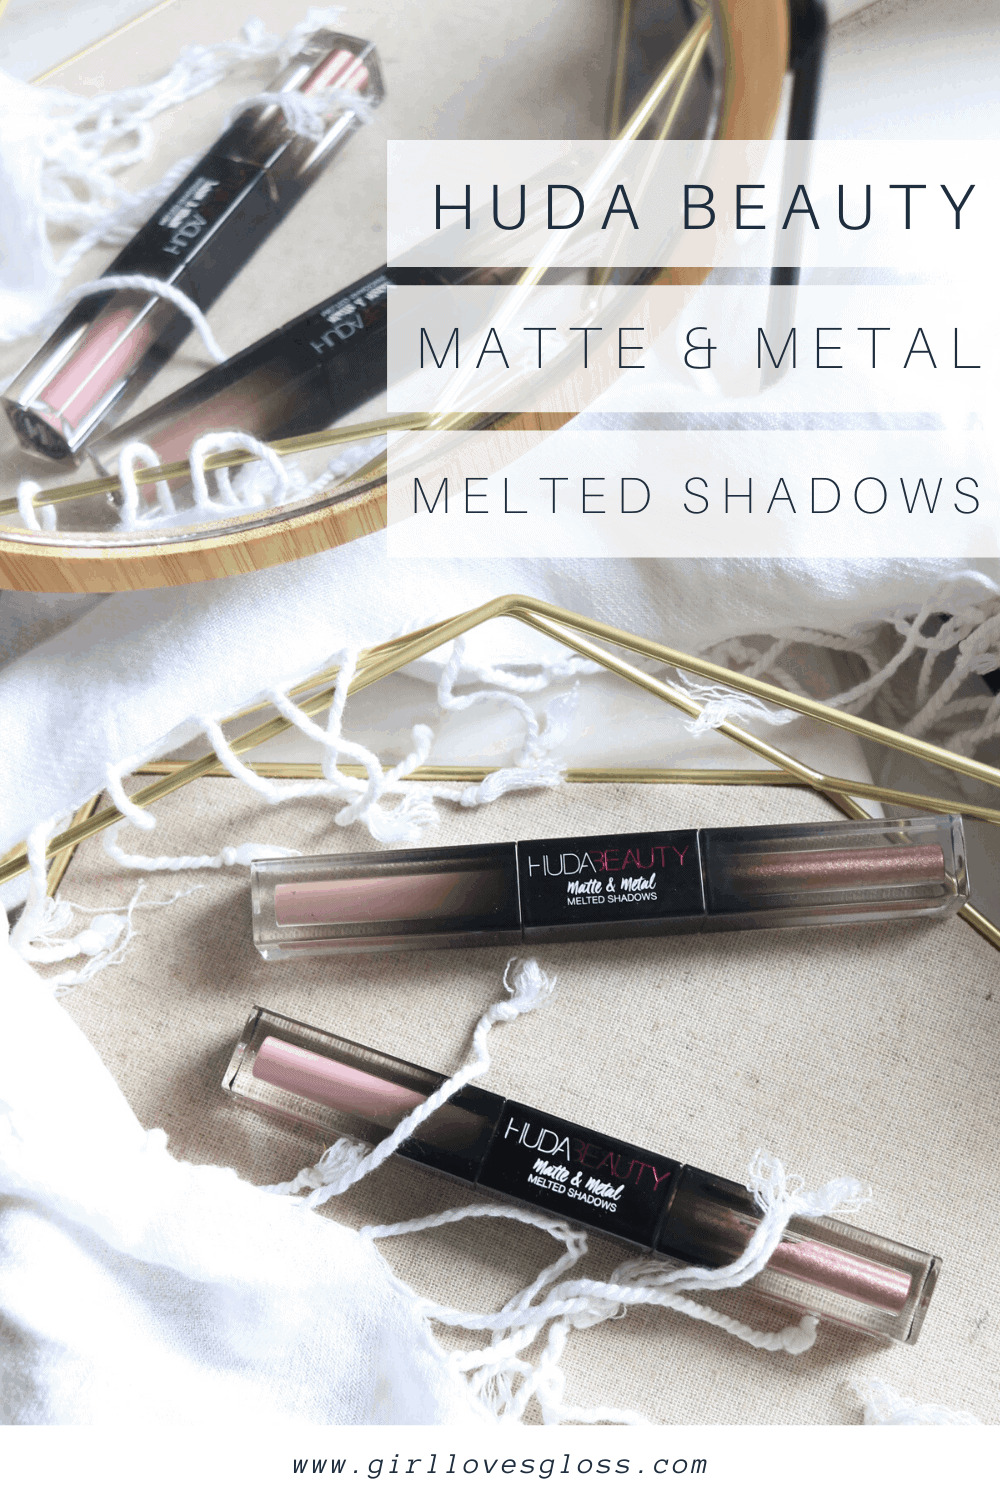 Huda Beauty Matte & Metal Melted Shadow swatches and review